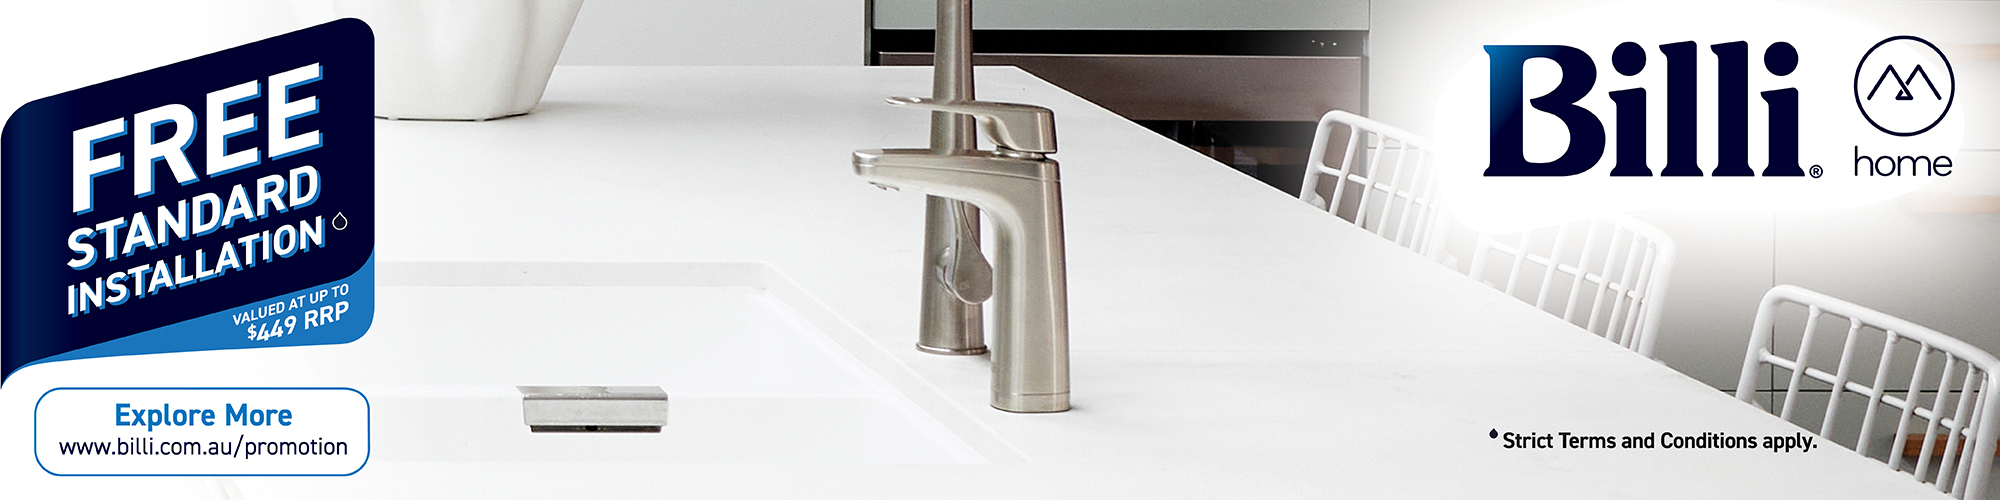 Free Standard Installation Valued Up To $449* with Selected Billi Taps